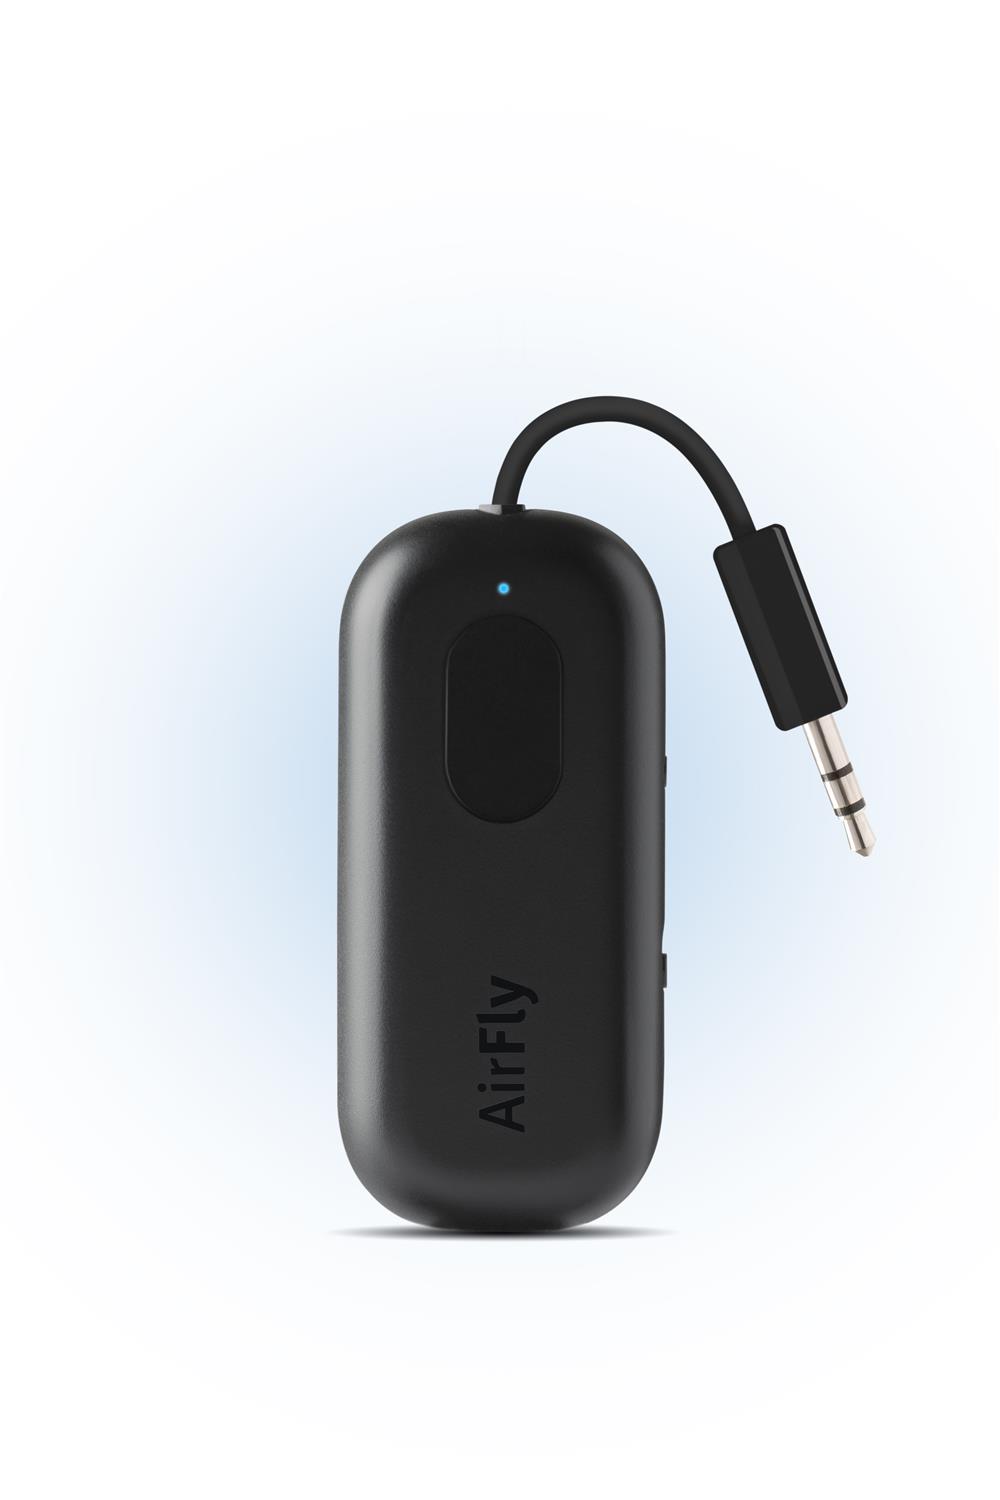 Twelve South AirFly Pro Bluetooth Wireless Audio Transmitter/Receiver for up to 2 AirPods/Wireless Headphones - Black